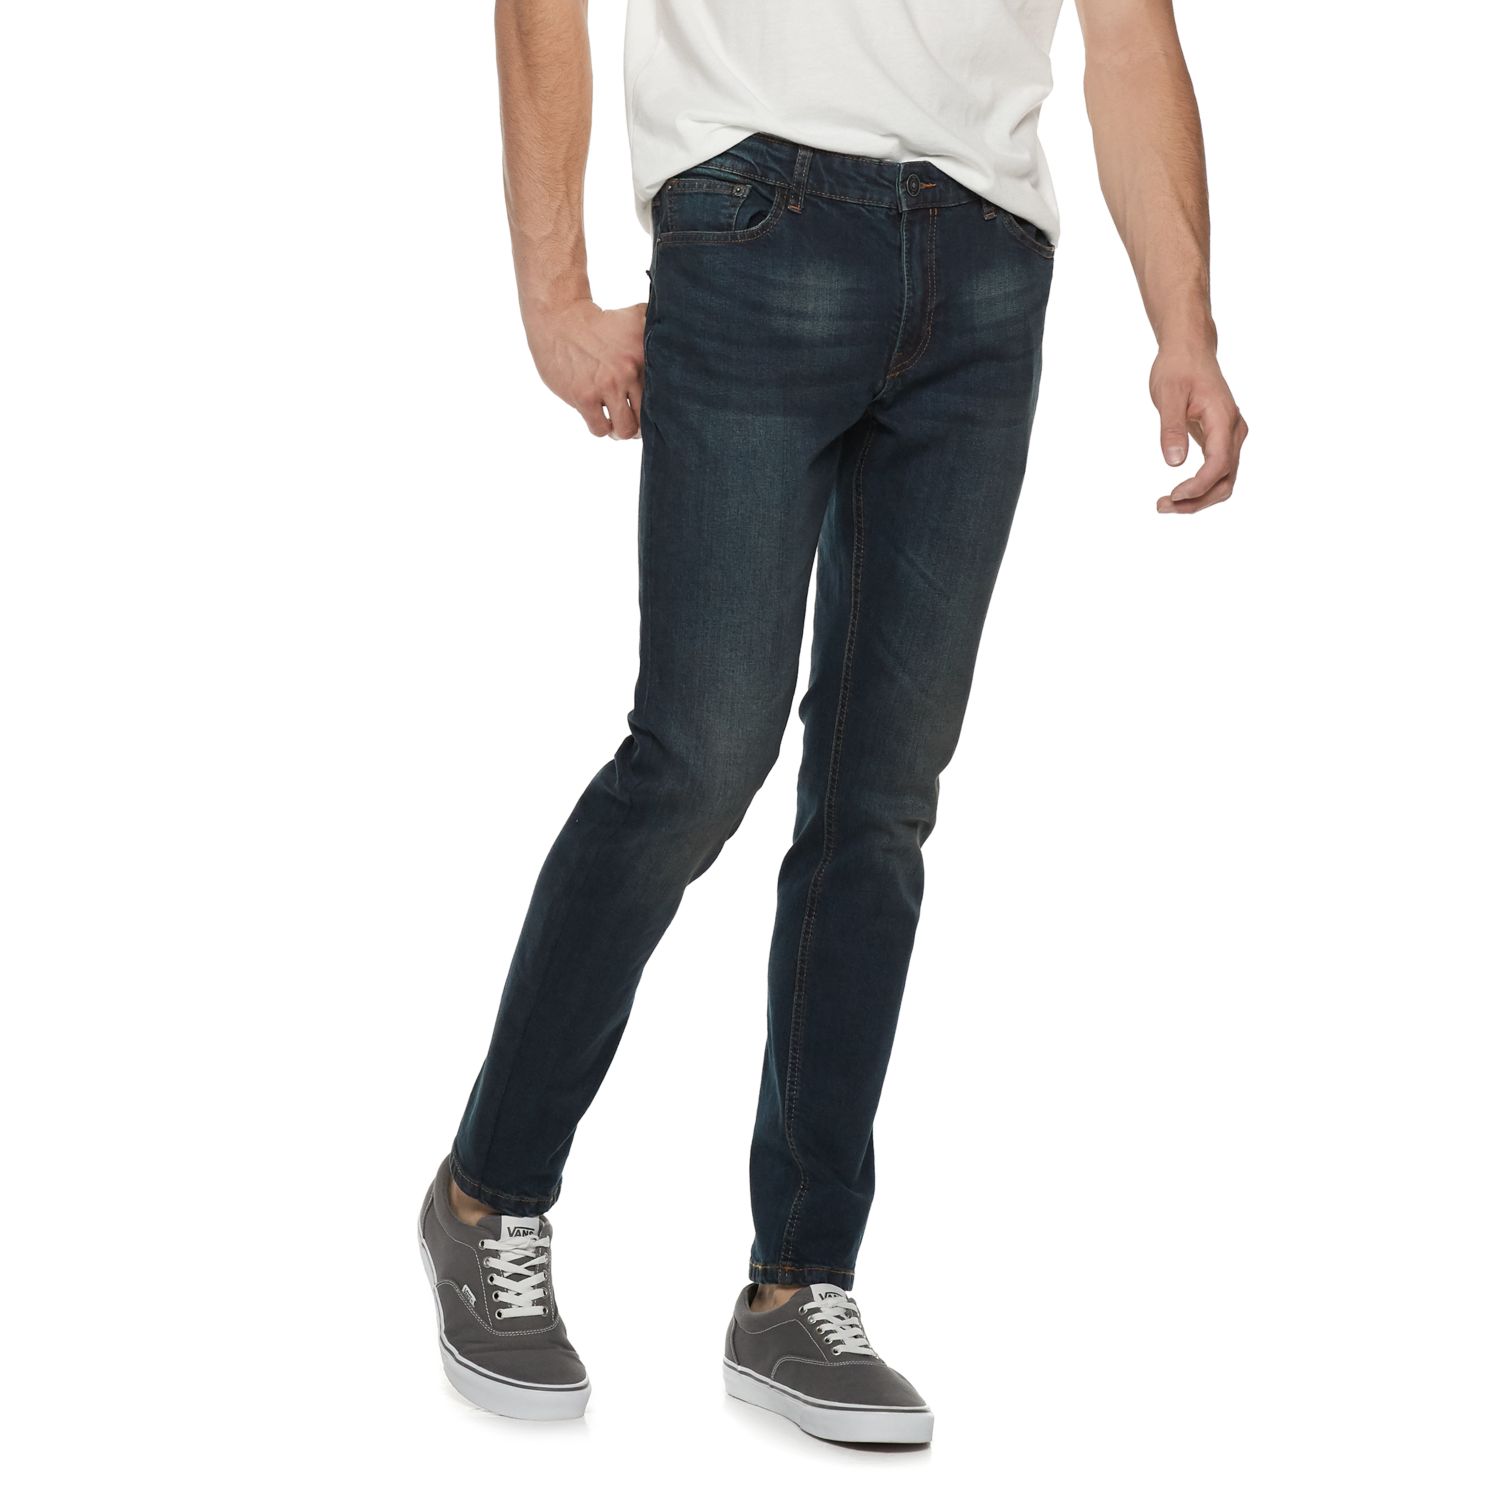 ring of fire bootcut jeans